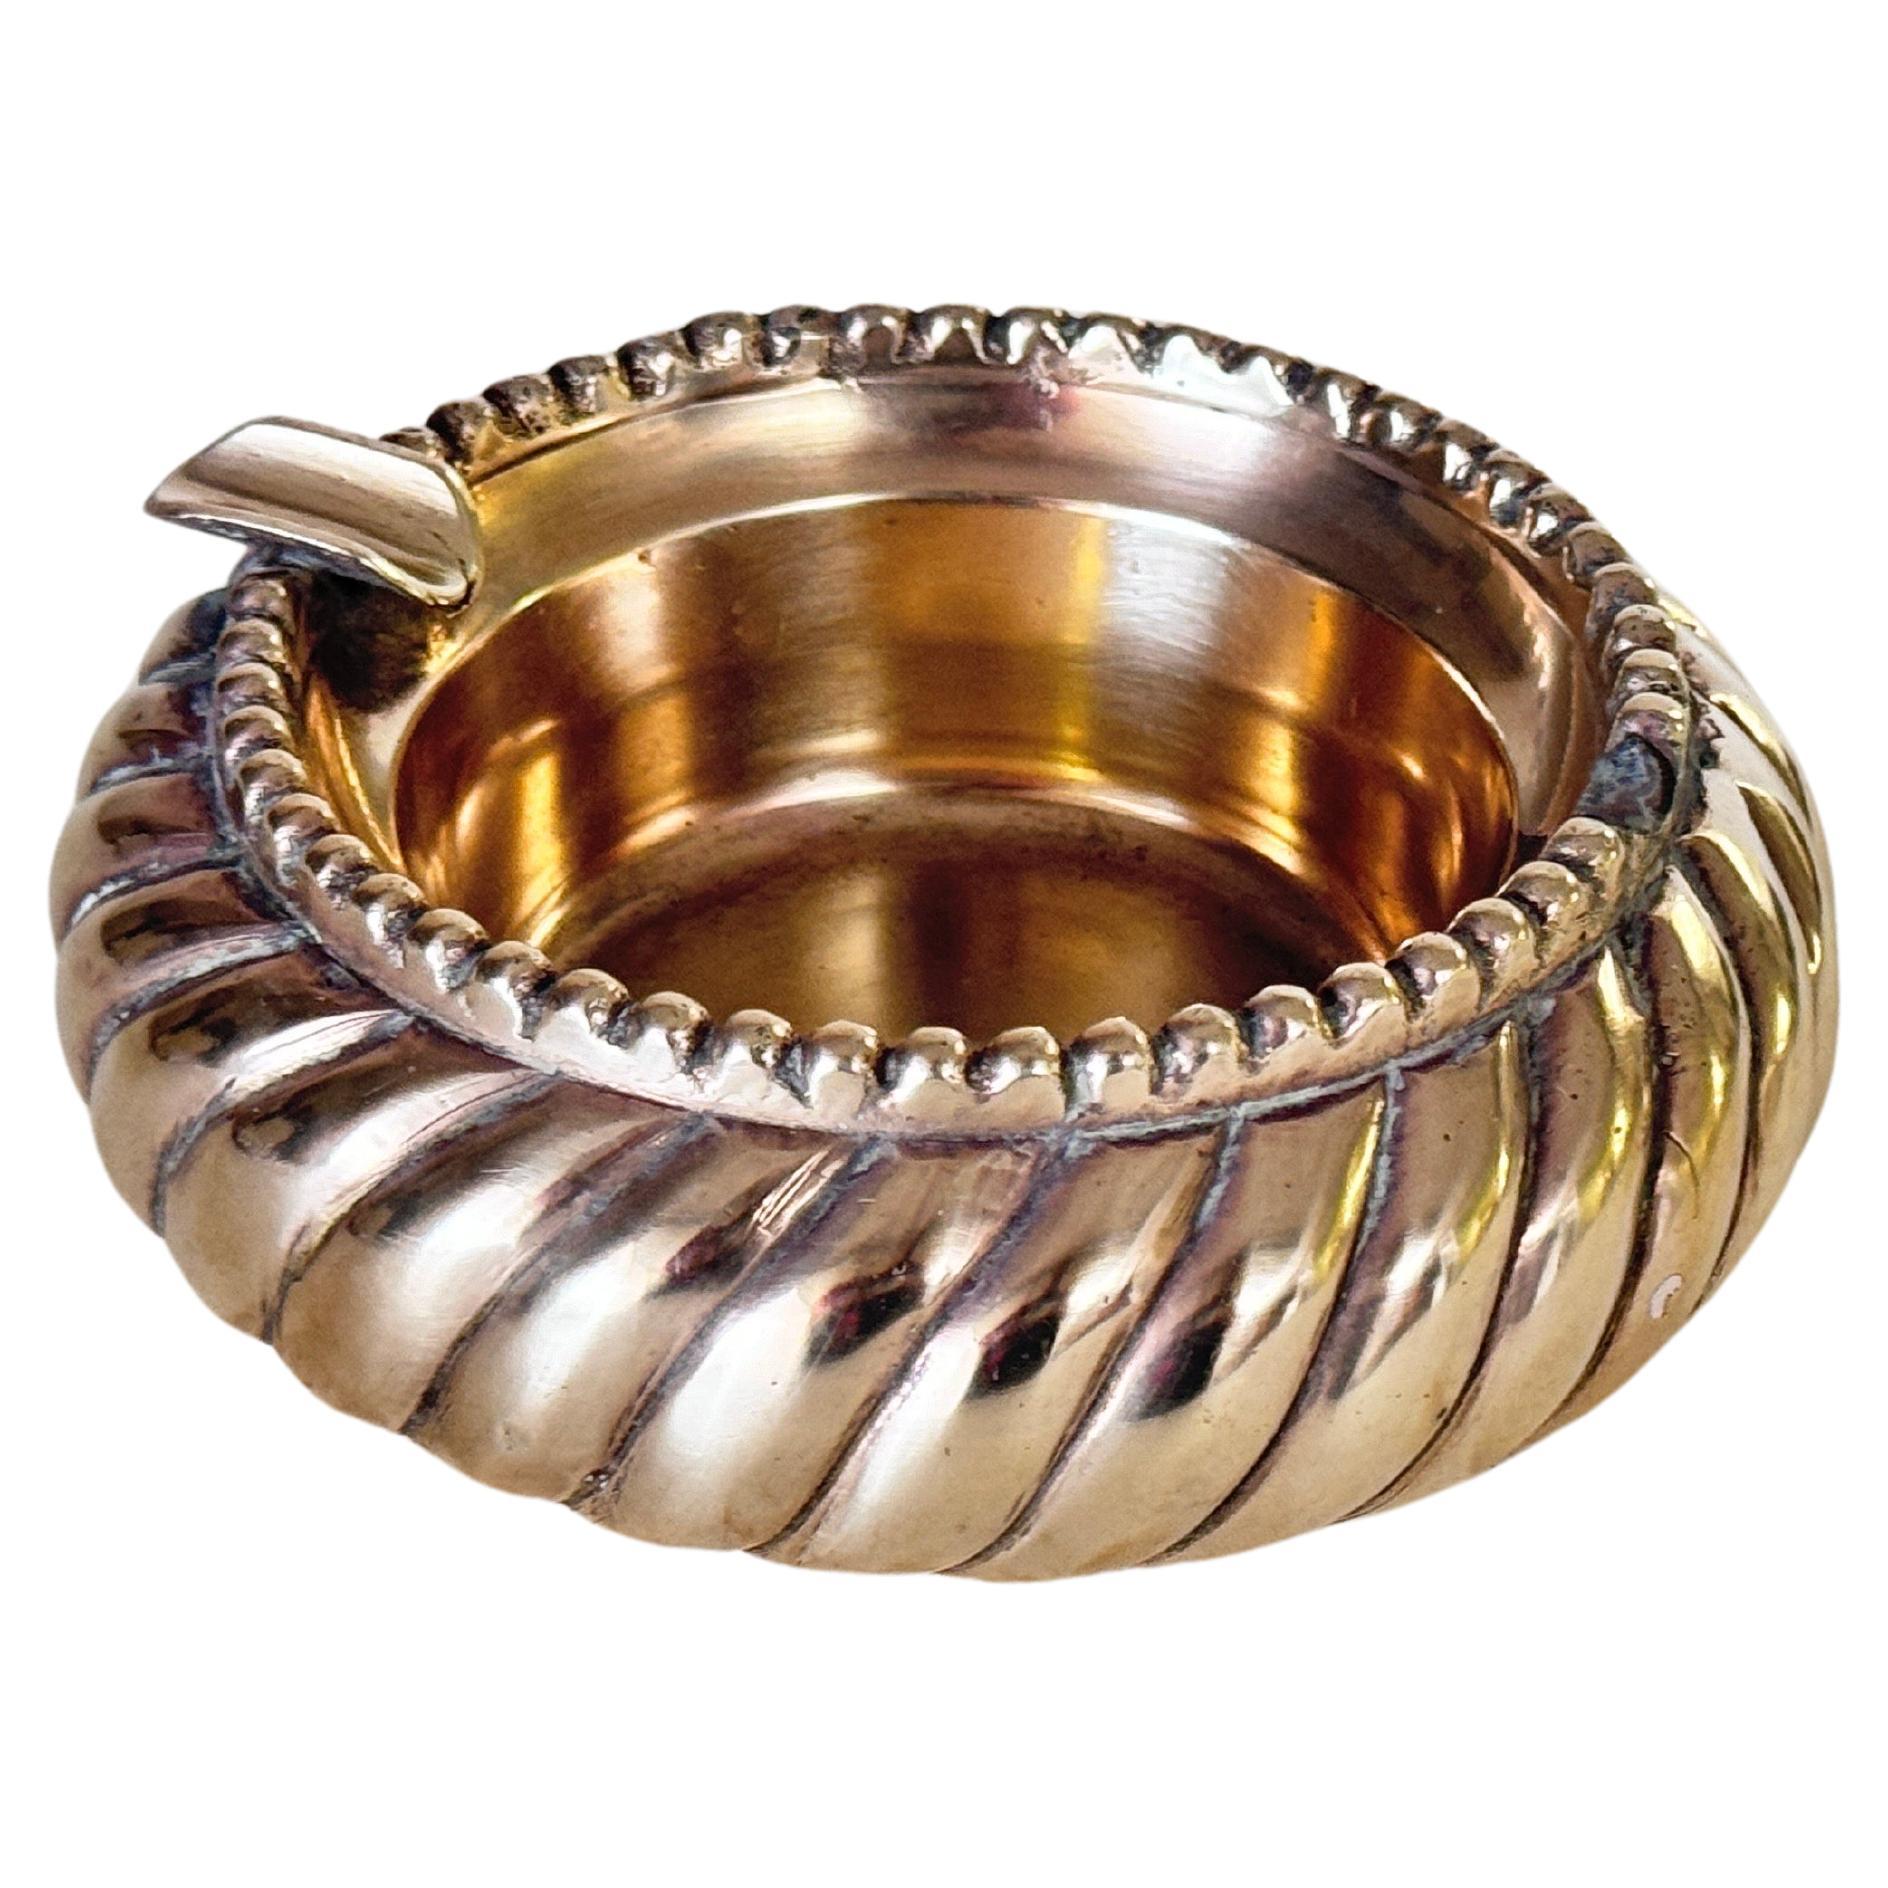  Solid Brass Ashtray Beatiful Patina For Sale